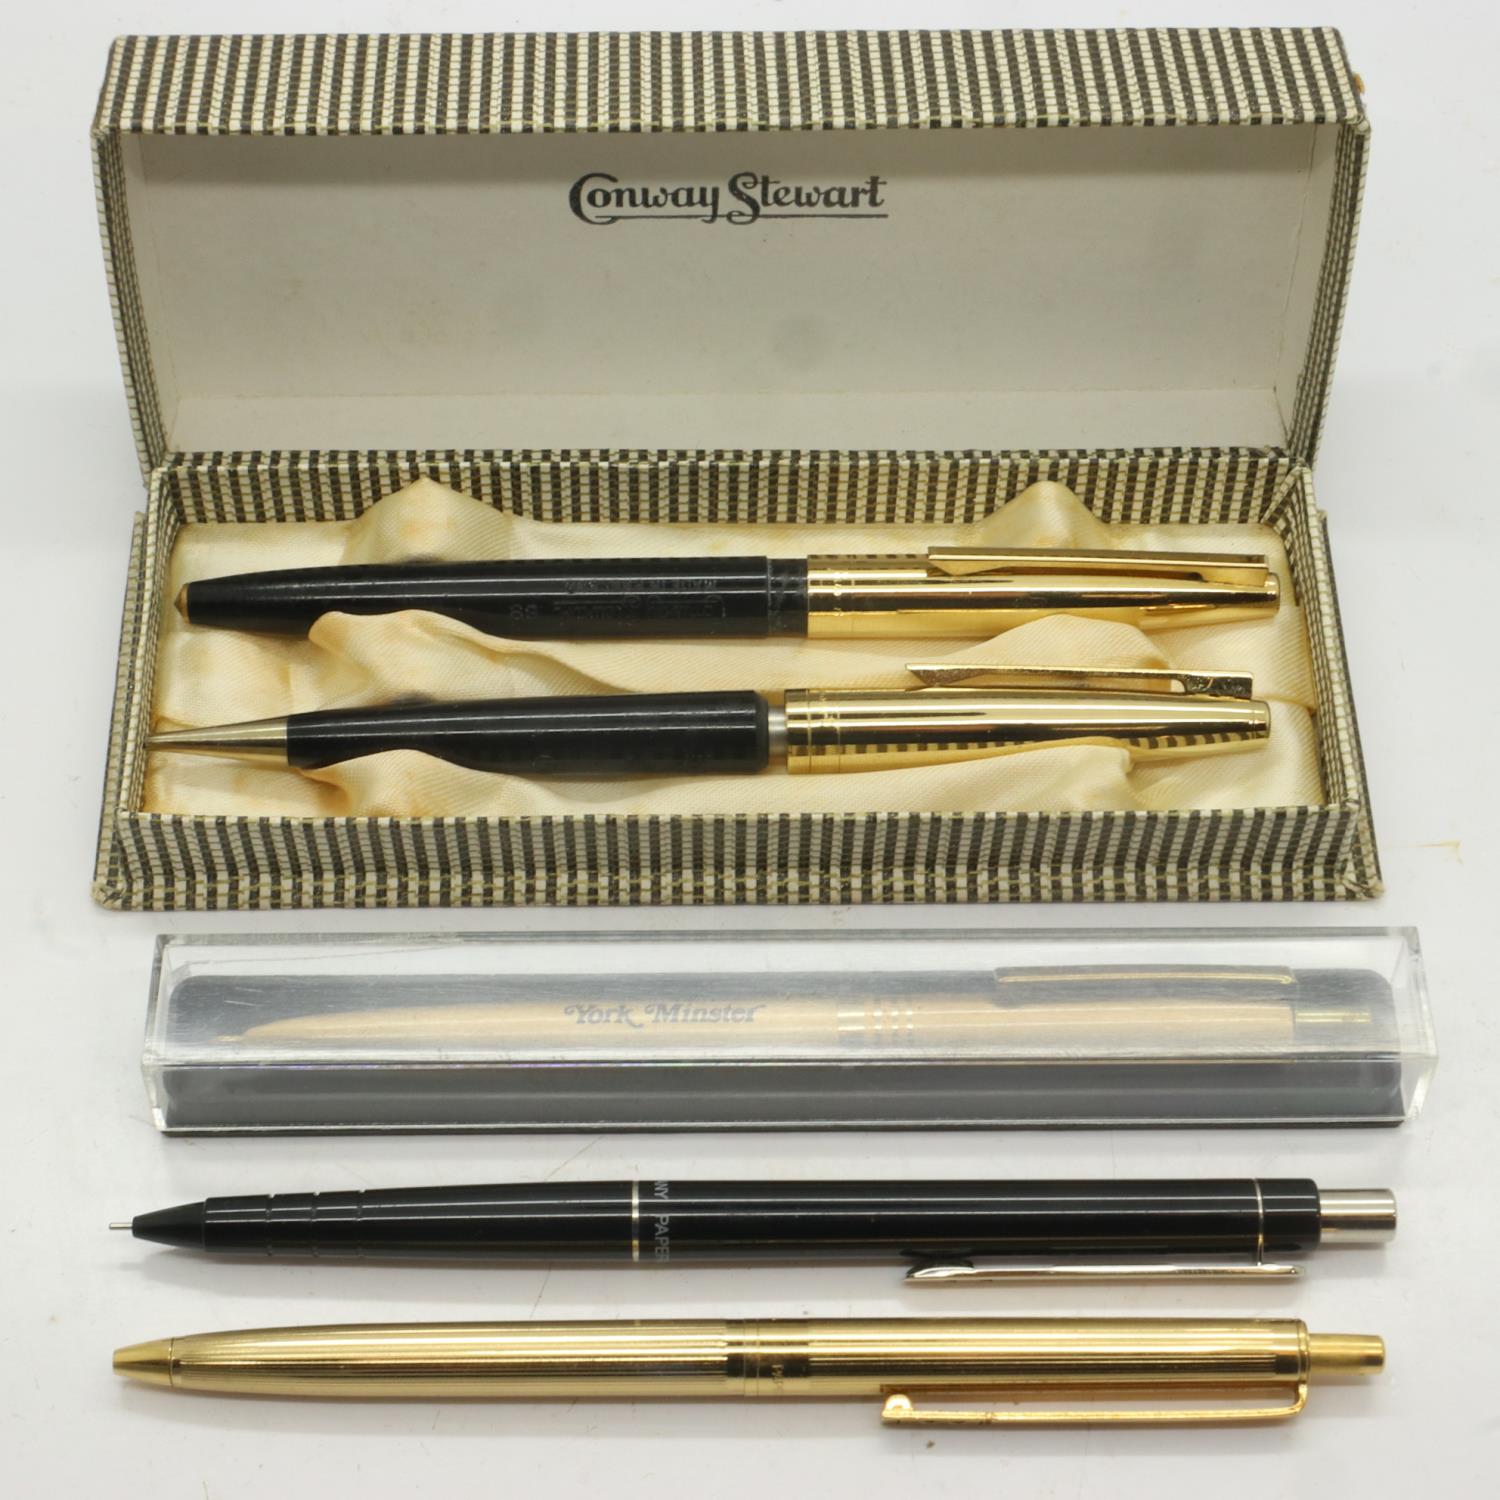 Conway Stewart model 69 pen and pencil set and other pens. UK P&P Group 1 (£16+VAT for the first lot